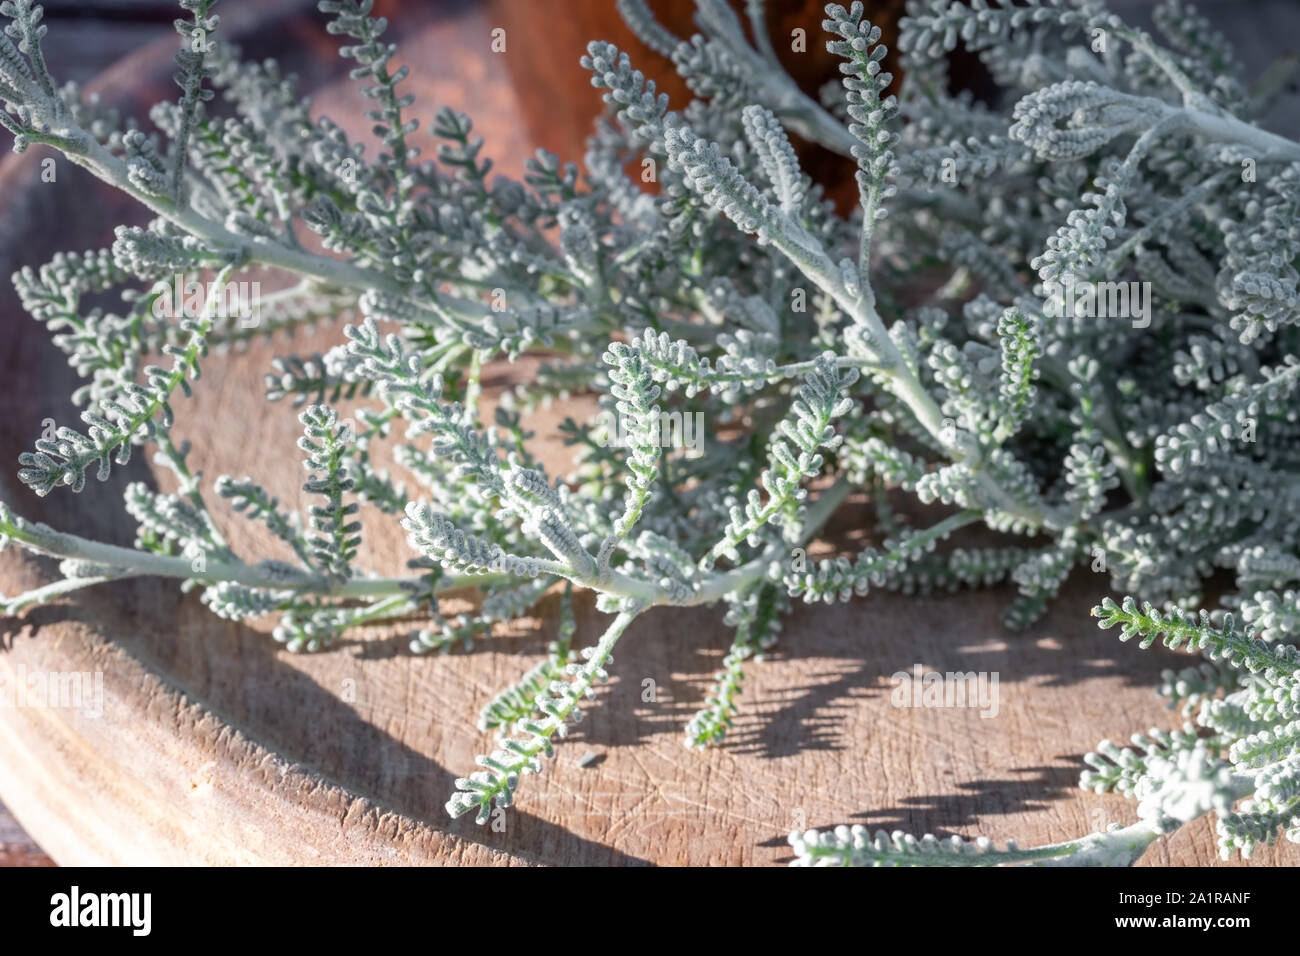 Detail of fresh Santolina chamaecyparissus plant on a table Stock Photo